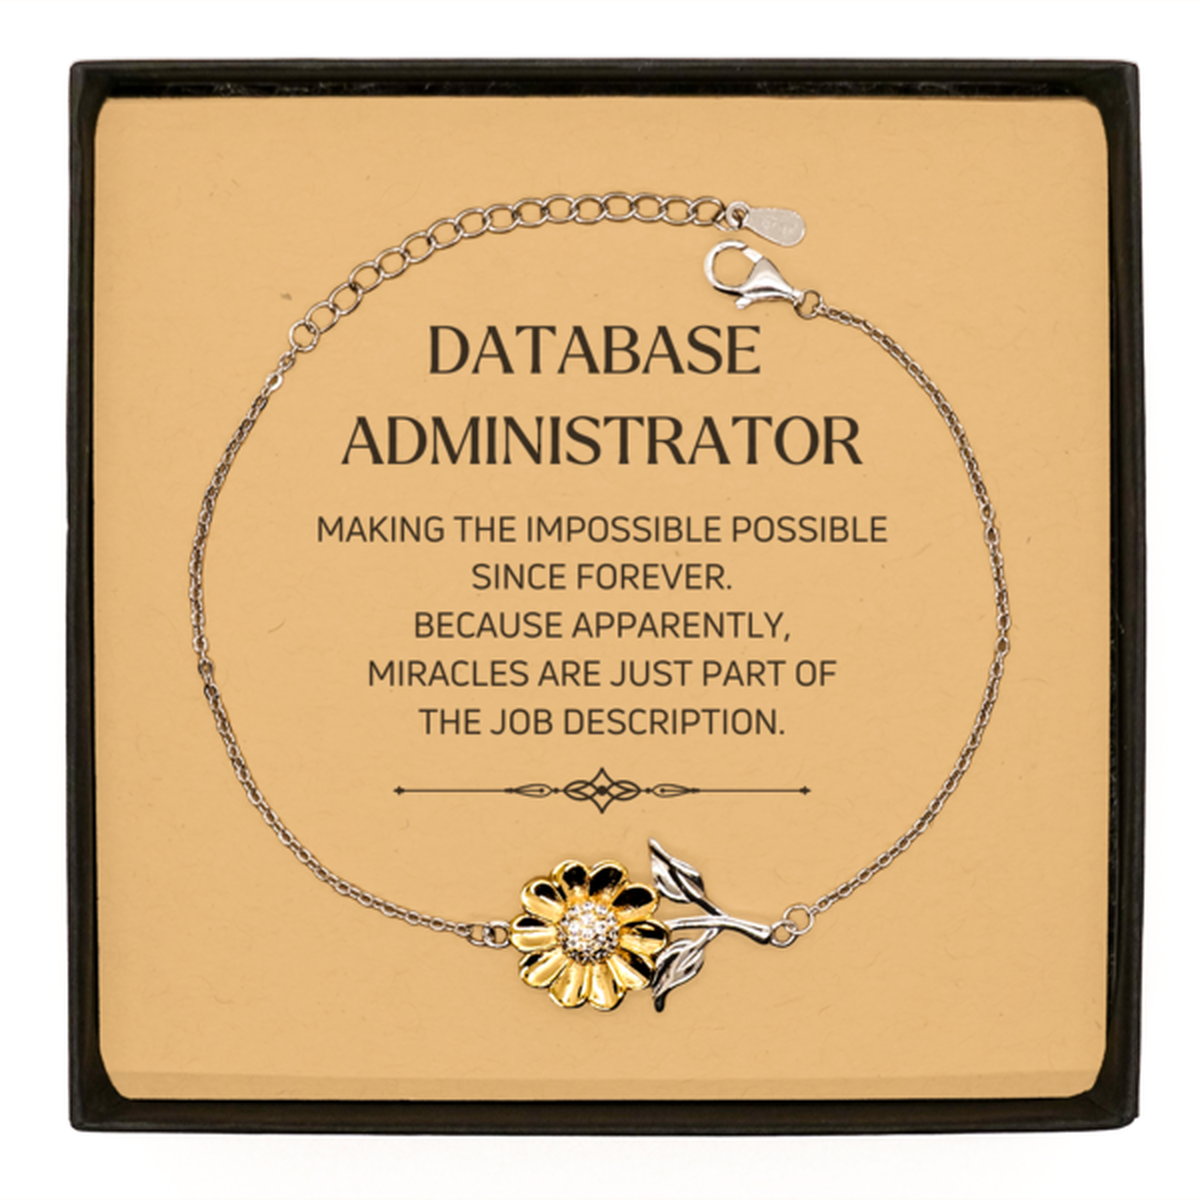 Funny Database Administrator Gifts, Miracles are just part of the job description, Inspirational Birthday Sunflower Bracelet For Database Administrator, Men, Women, Coworkers, Friends, Boss